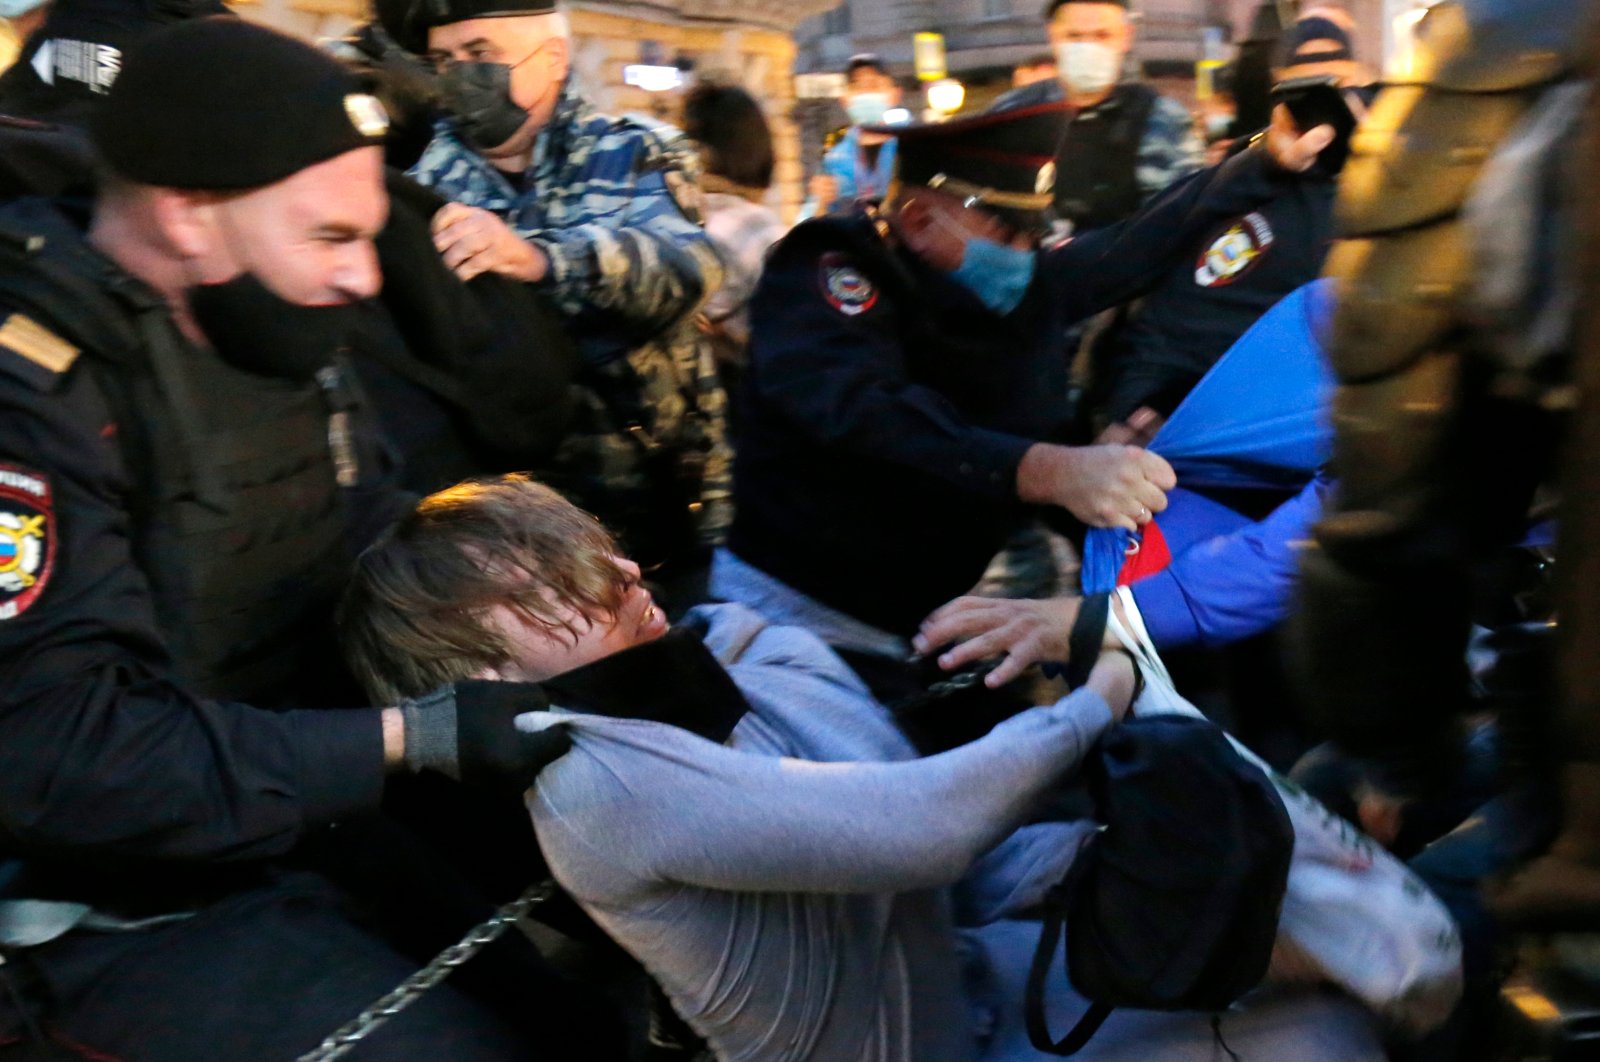 Police officers detain a protester during a rally to cancel the results of voting on amendments to the Constitution in Pushkin Square in Moscow, Russia, July 15, 2020. (AP Photo)